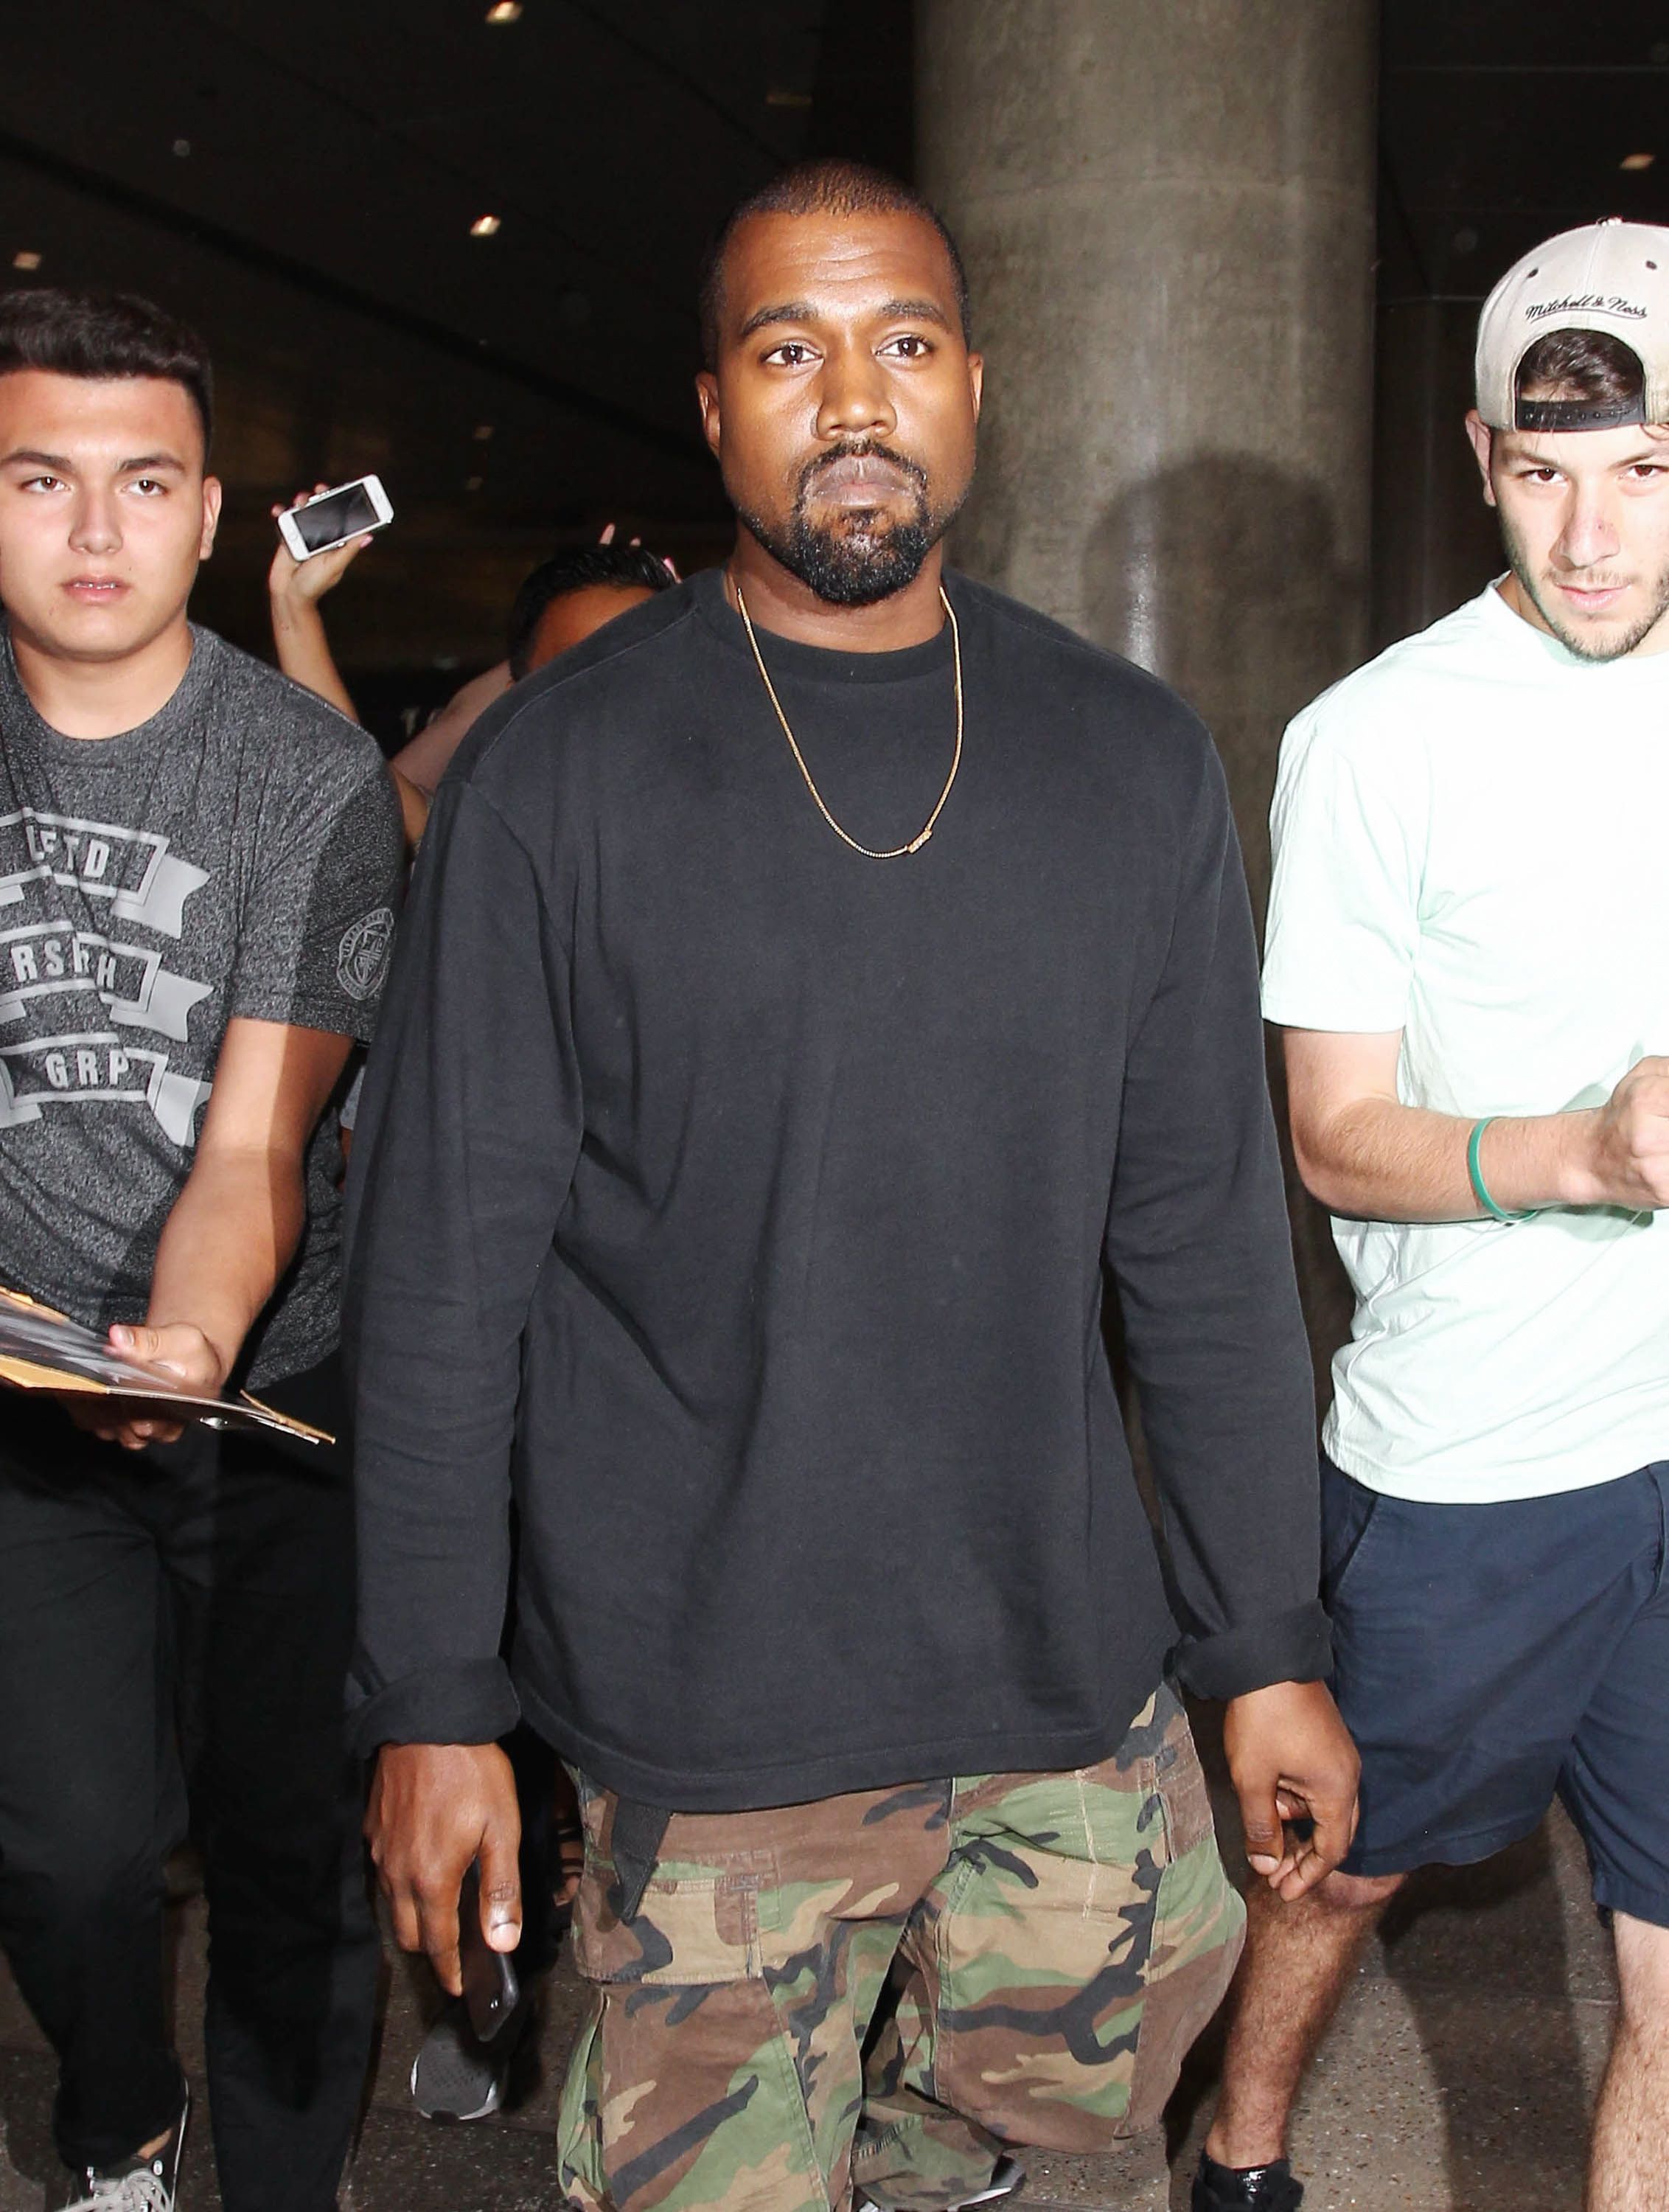 07/01/2015 - Kanye West - Kanye West Sighted at LAX Airport on July 1, 2015 - Los Angeles International Airport - Los Angeles, CA, USA - Keywords: 3/4 Length Shot, Smartphone, iPhone 6, Camo Pants, Brown and Green Camouflage Pants, Blue Long Sleeve Shirt, Gold Pendant, Facial Hair, Beard, Goatee, Person, Man, Vertical, Candid, Gold Necklace, Jewelry, Vertical, Casual Fashion, Travel, California, Arts Culture and Entertainment, Celebrities, Celebrity, Walking, Singer, Performer, Rapper Orientation: Portrait Face Count: 1 - False - Photo Credit: STPR / PRPhotos.com - Contact (1-866-551-7827) - Portrait Face Count: 1